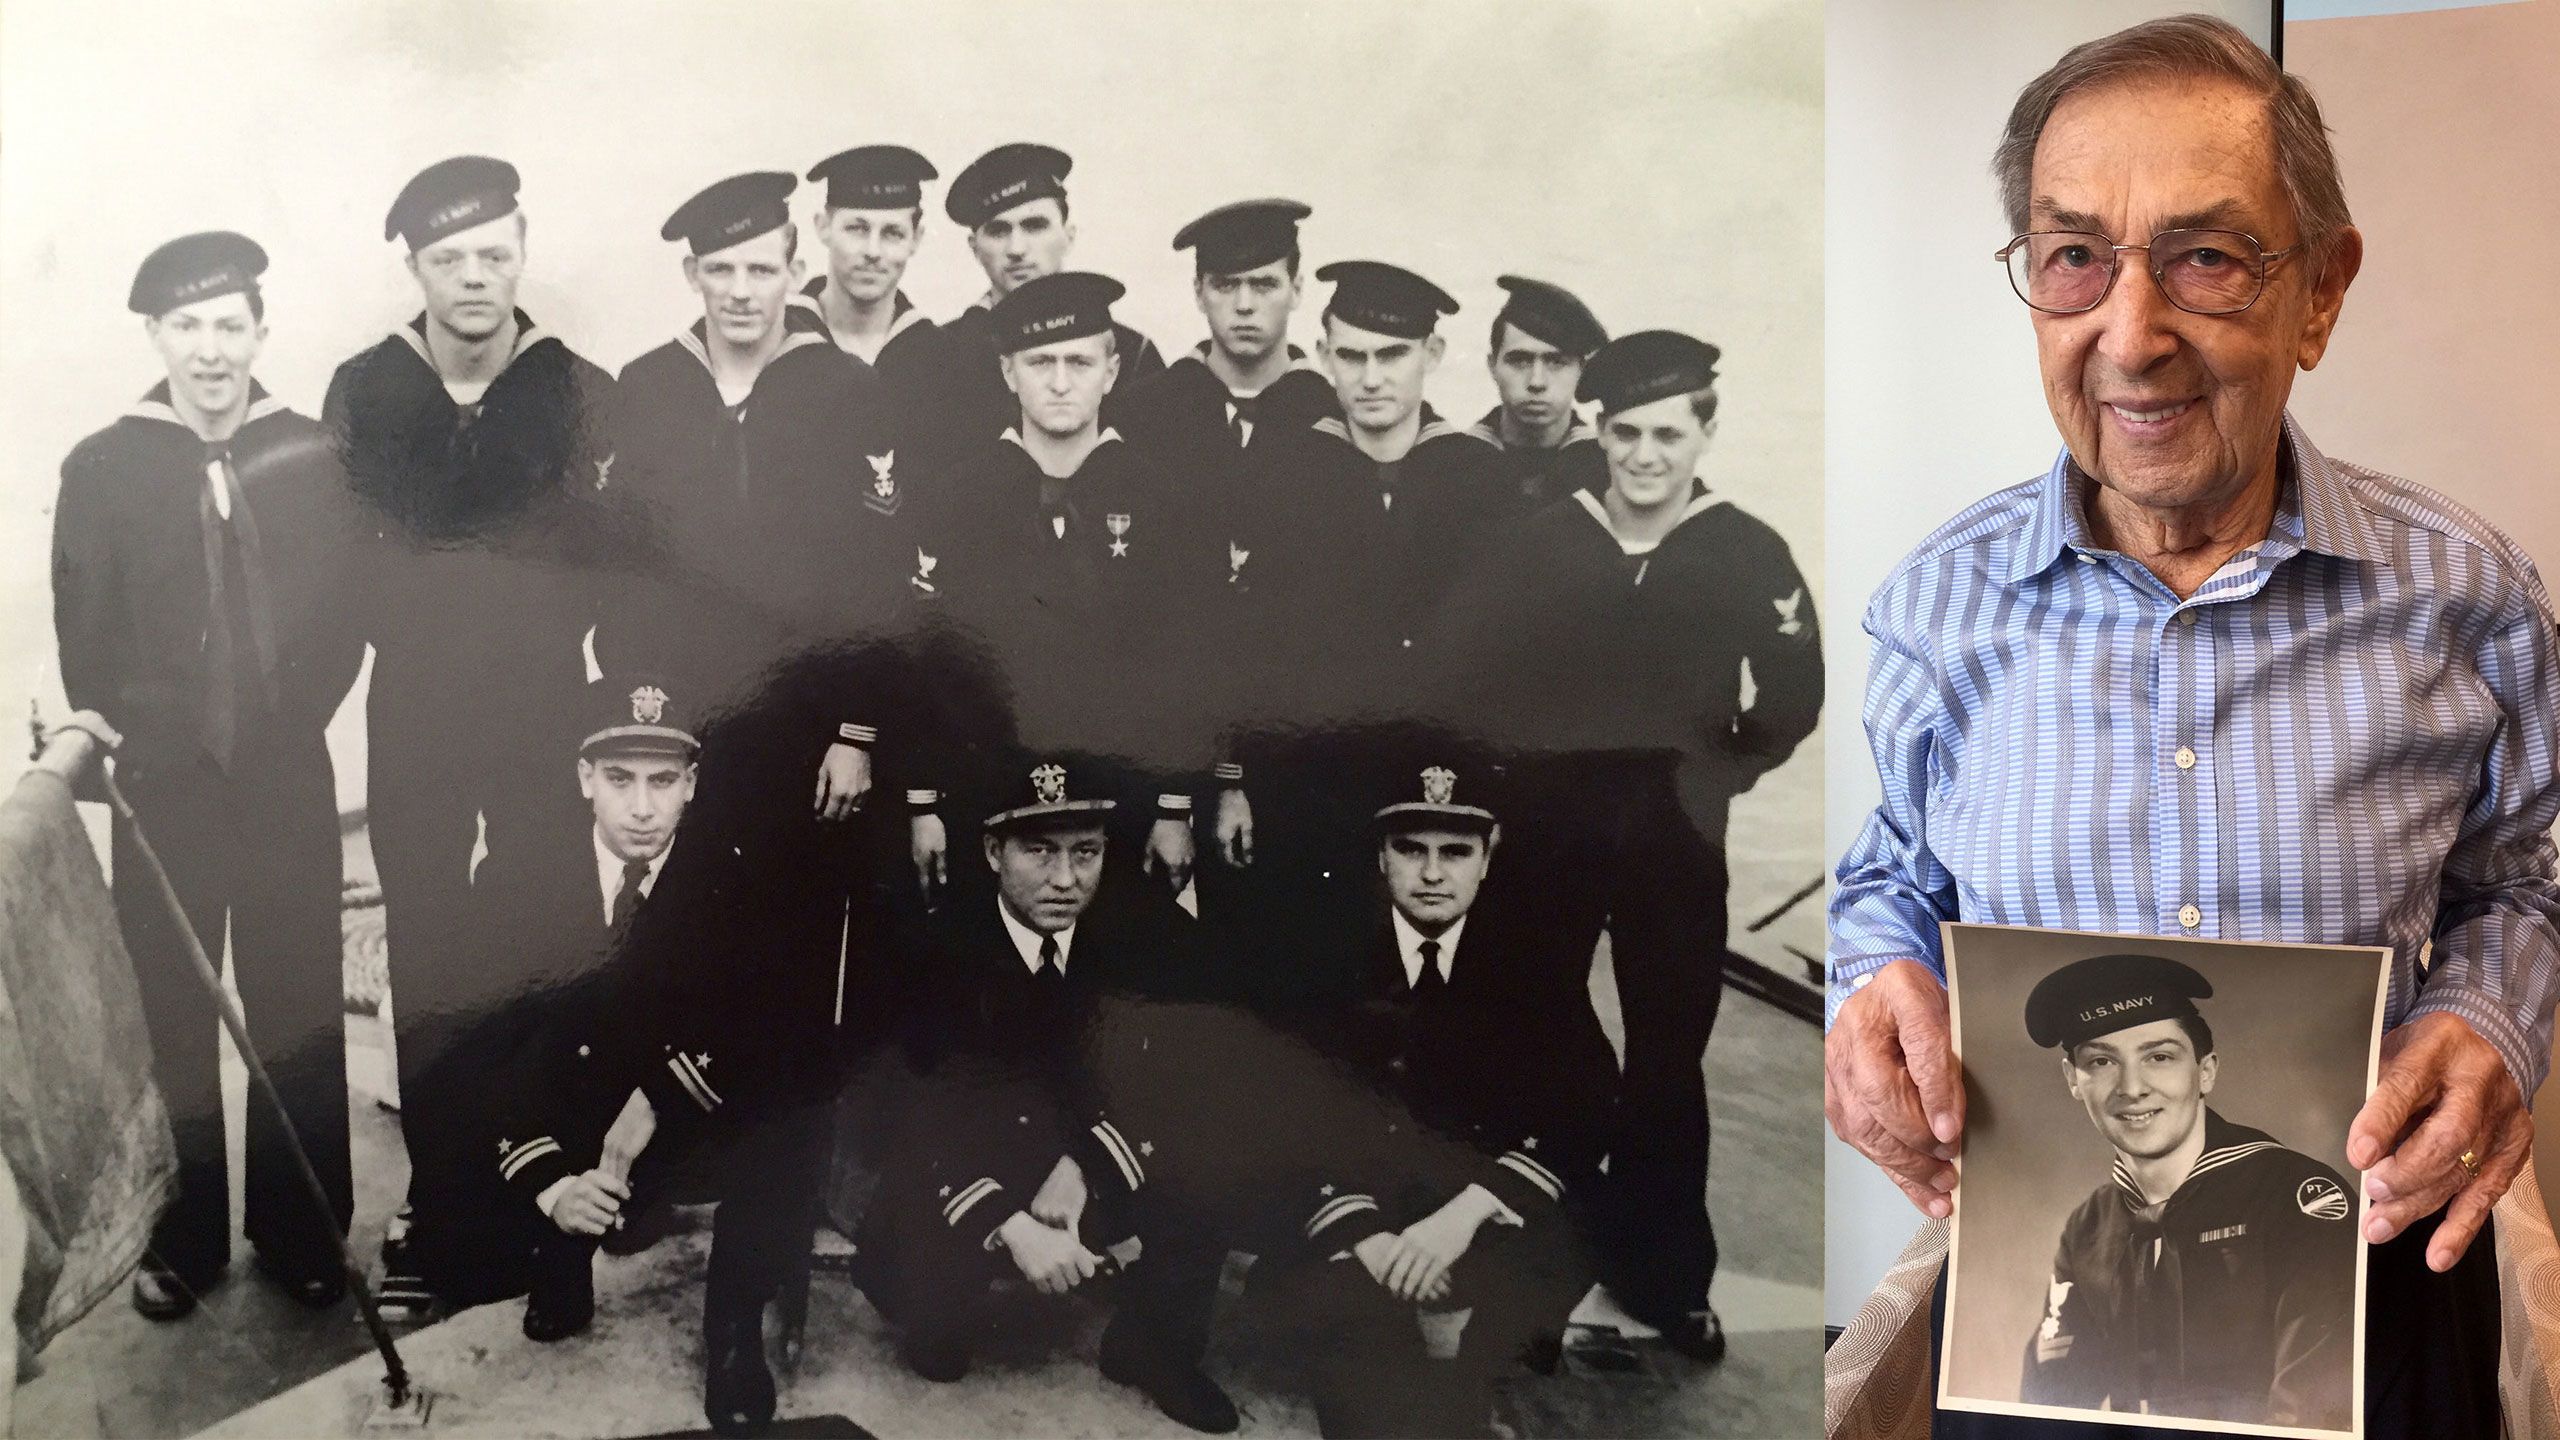 Sol Kaslow, now 92, holds a photo of himself in the Navy during World War II.